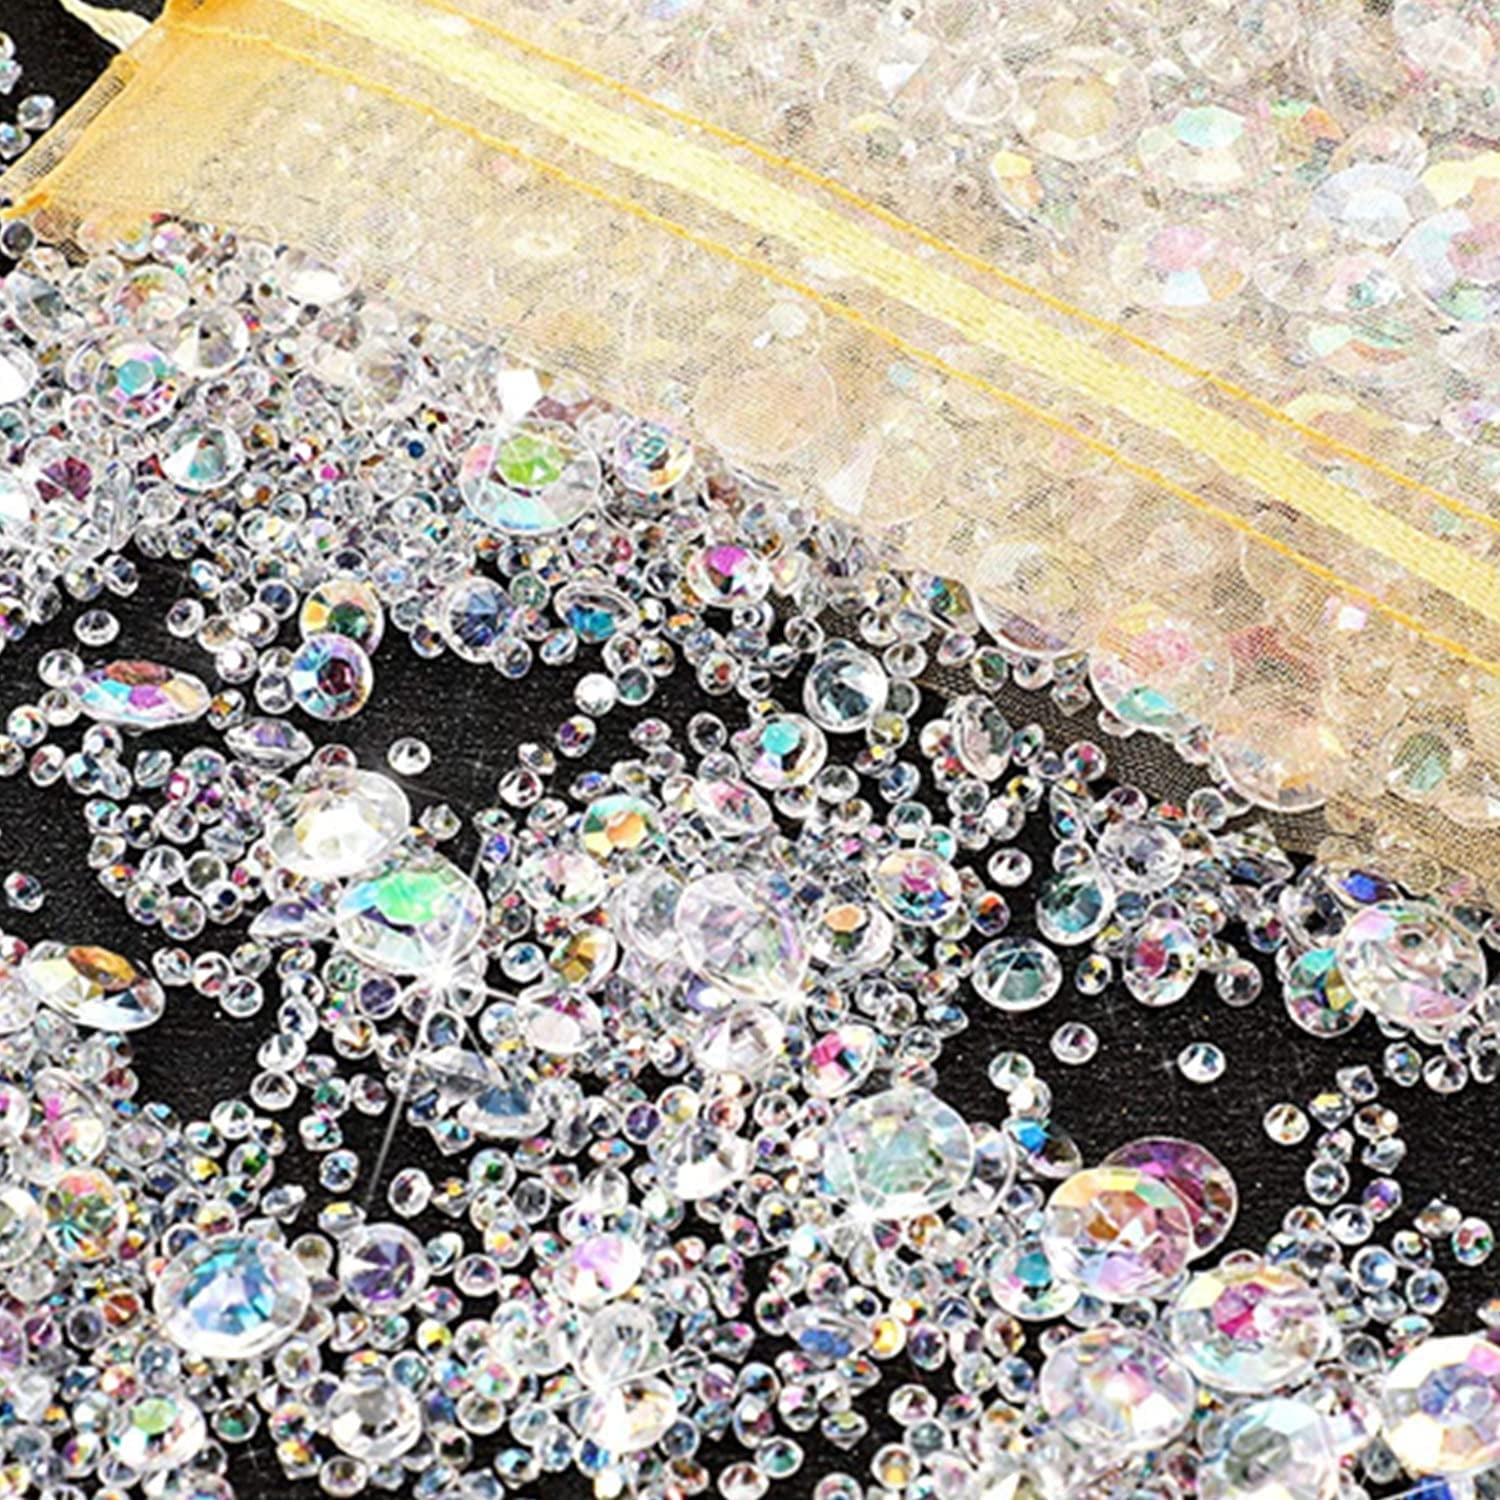 4000 SCATTER CRYSTALS DIAMOND TABLE CONFETTI WEDDING DECORATION CENTERPIECES 